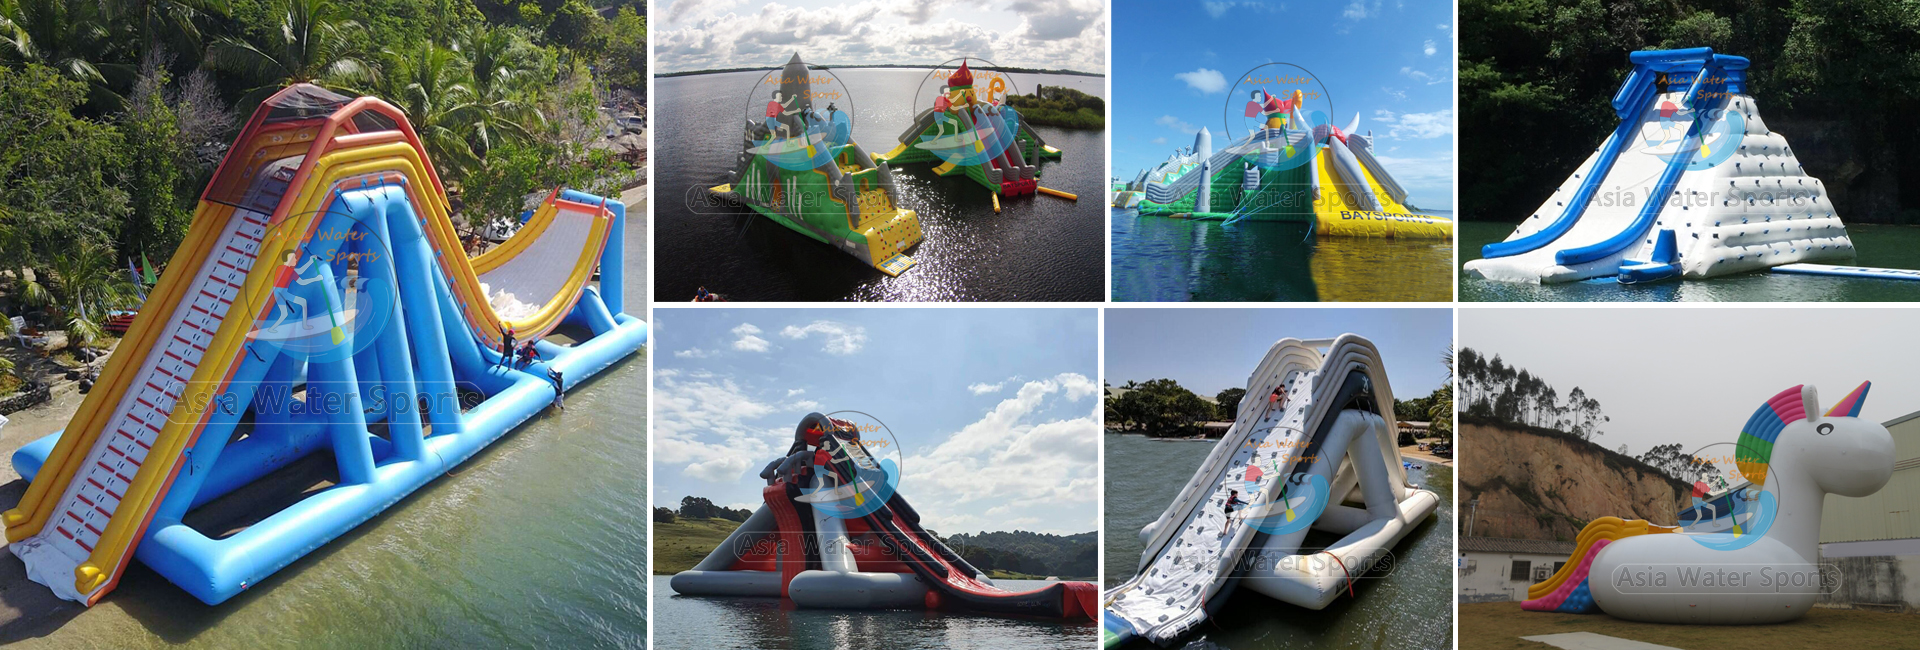 Largest Inflatable Water Park, Freefall Supreme Water Slide & Play Station